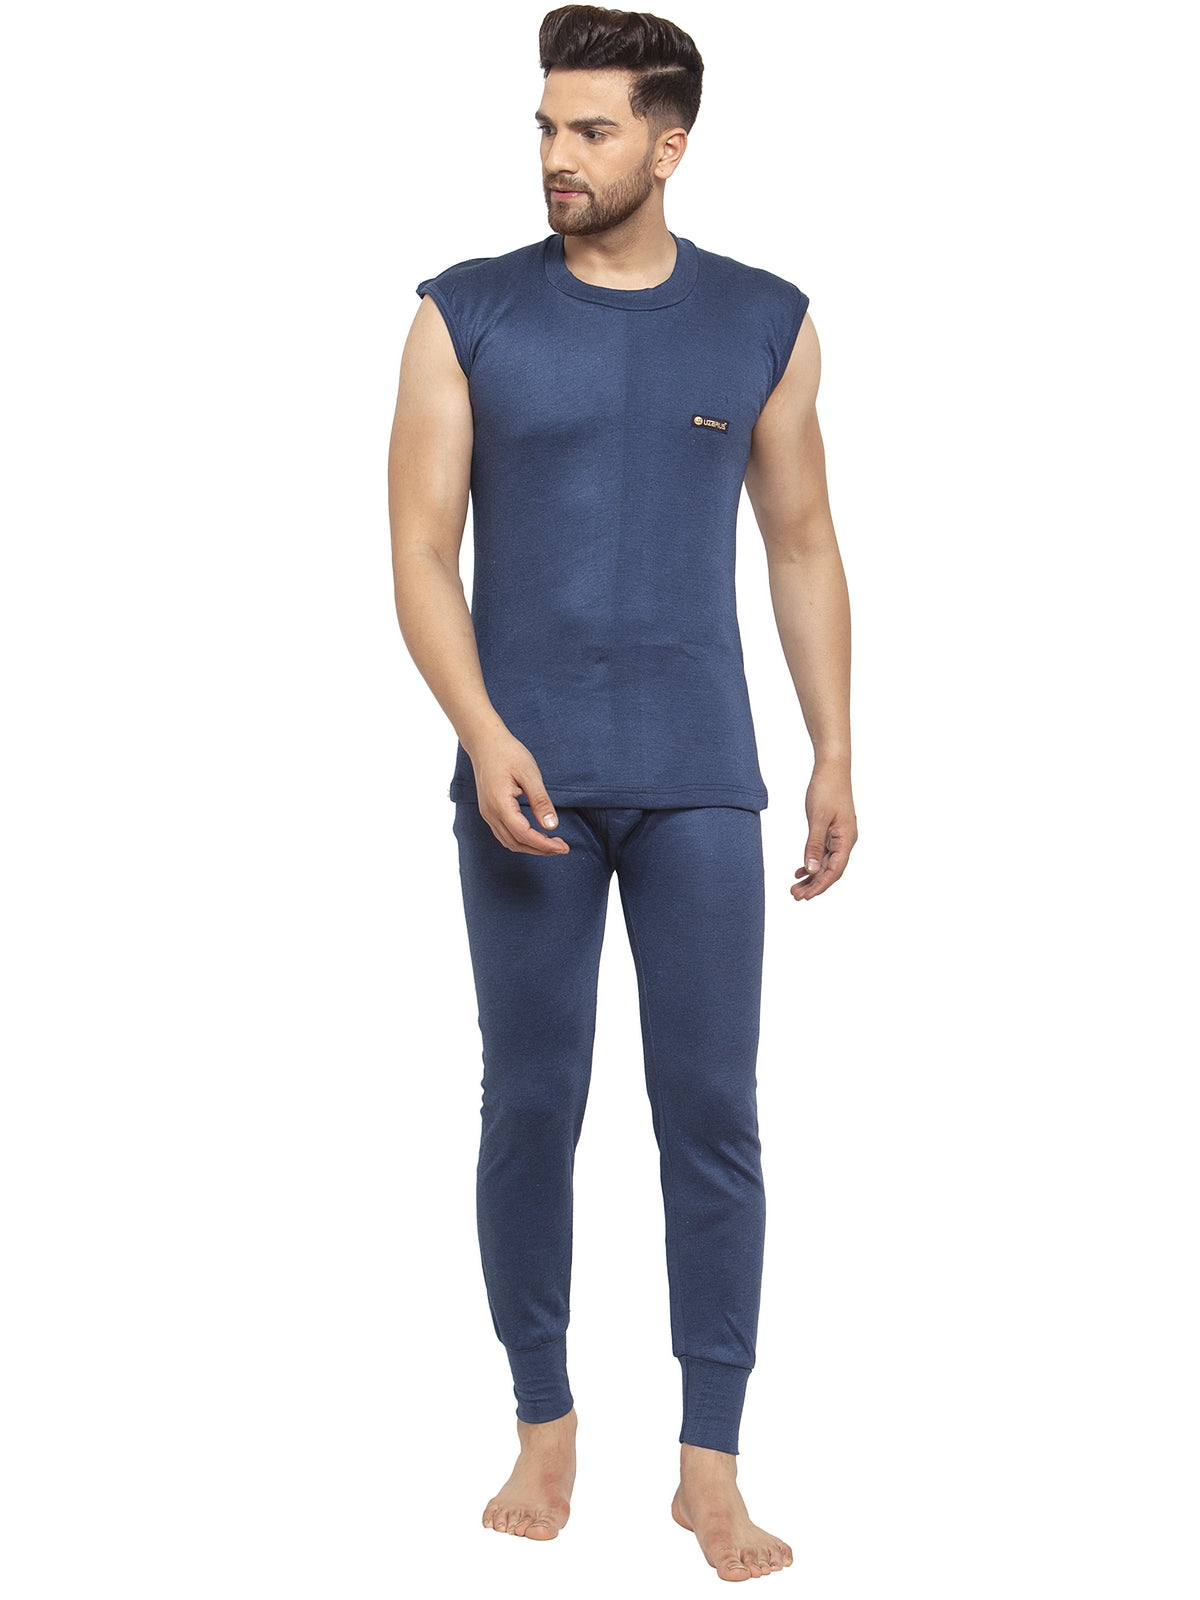 MEN'S SLEEVELESS THERMAL SET ( ROUND NECK VEST AND TROUSER)